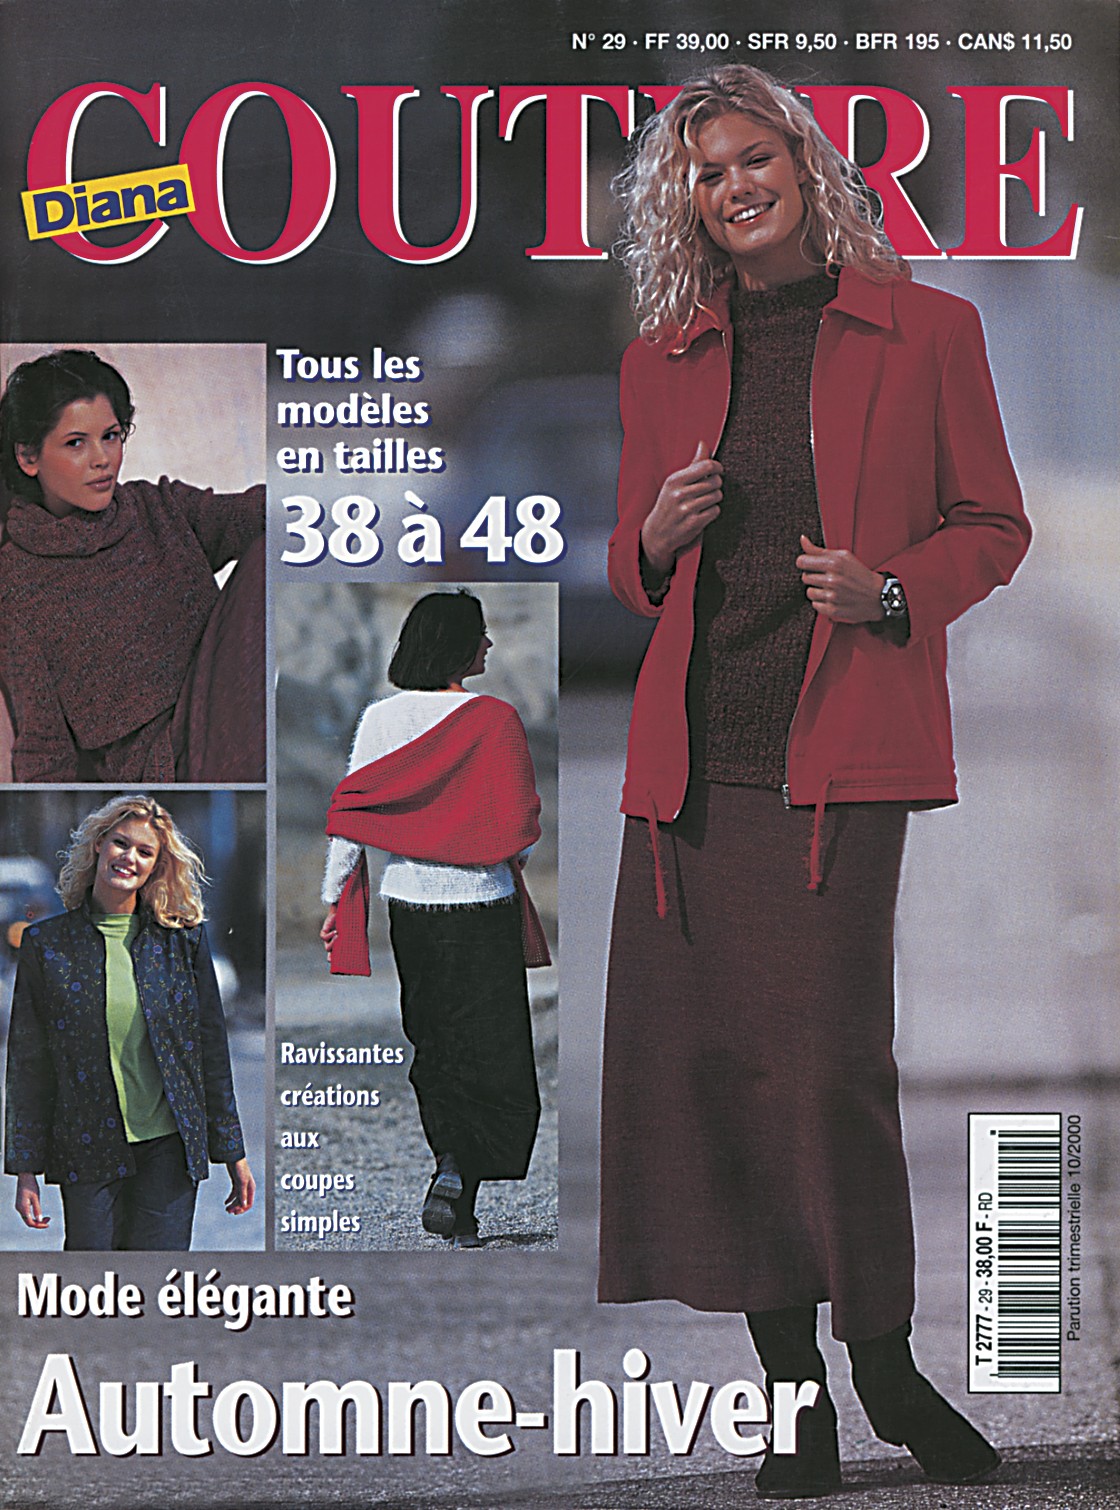 Diana Couture N°29 Automne-hiver